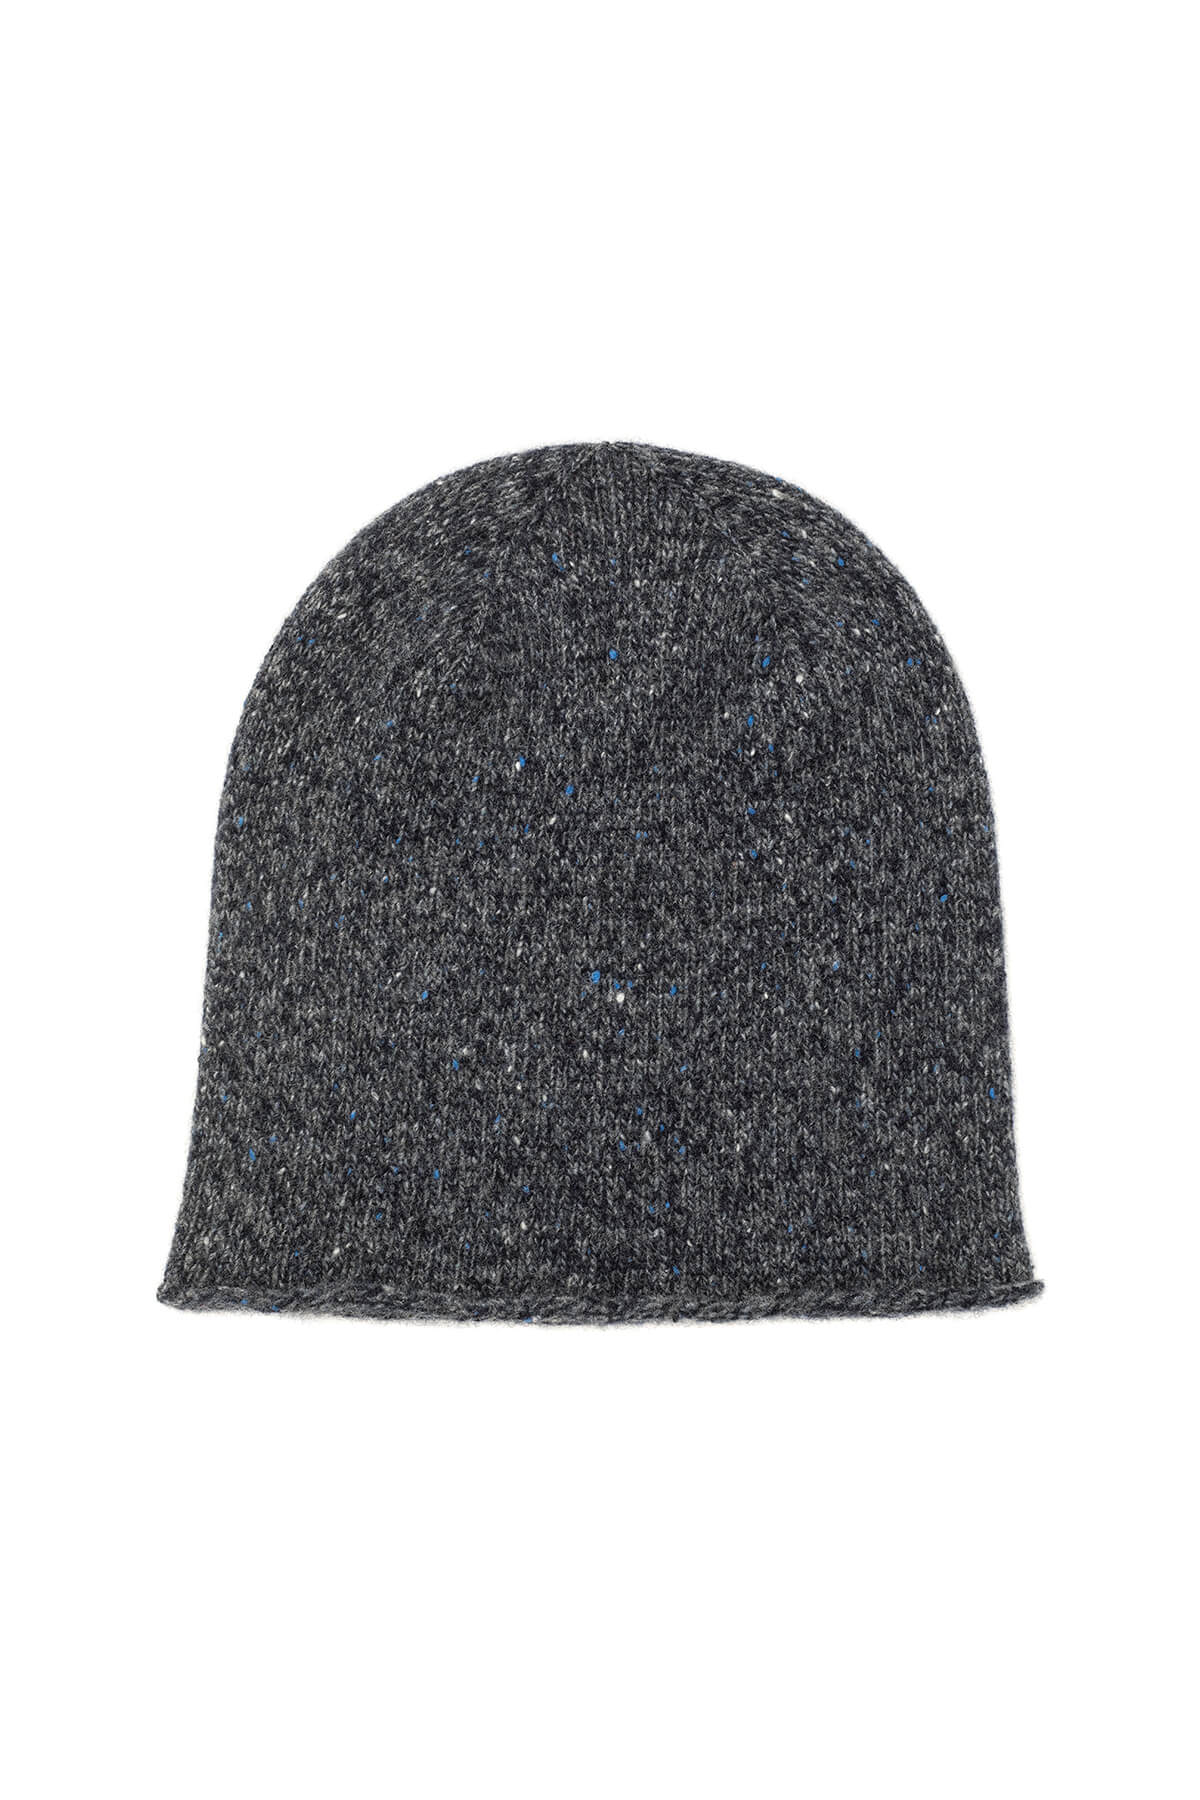 Johnstons of Elgin’s Mid Grey Cashmere Donegal Marl Beanie on a white background HAY03303004529